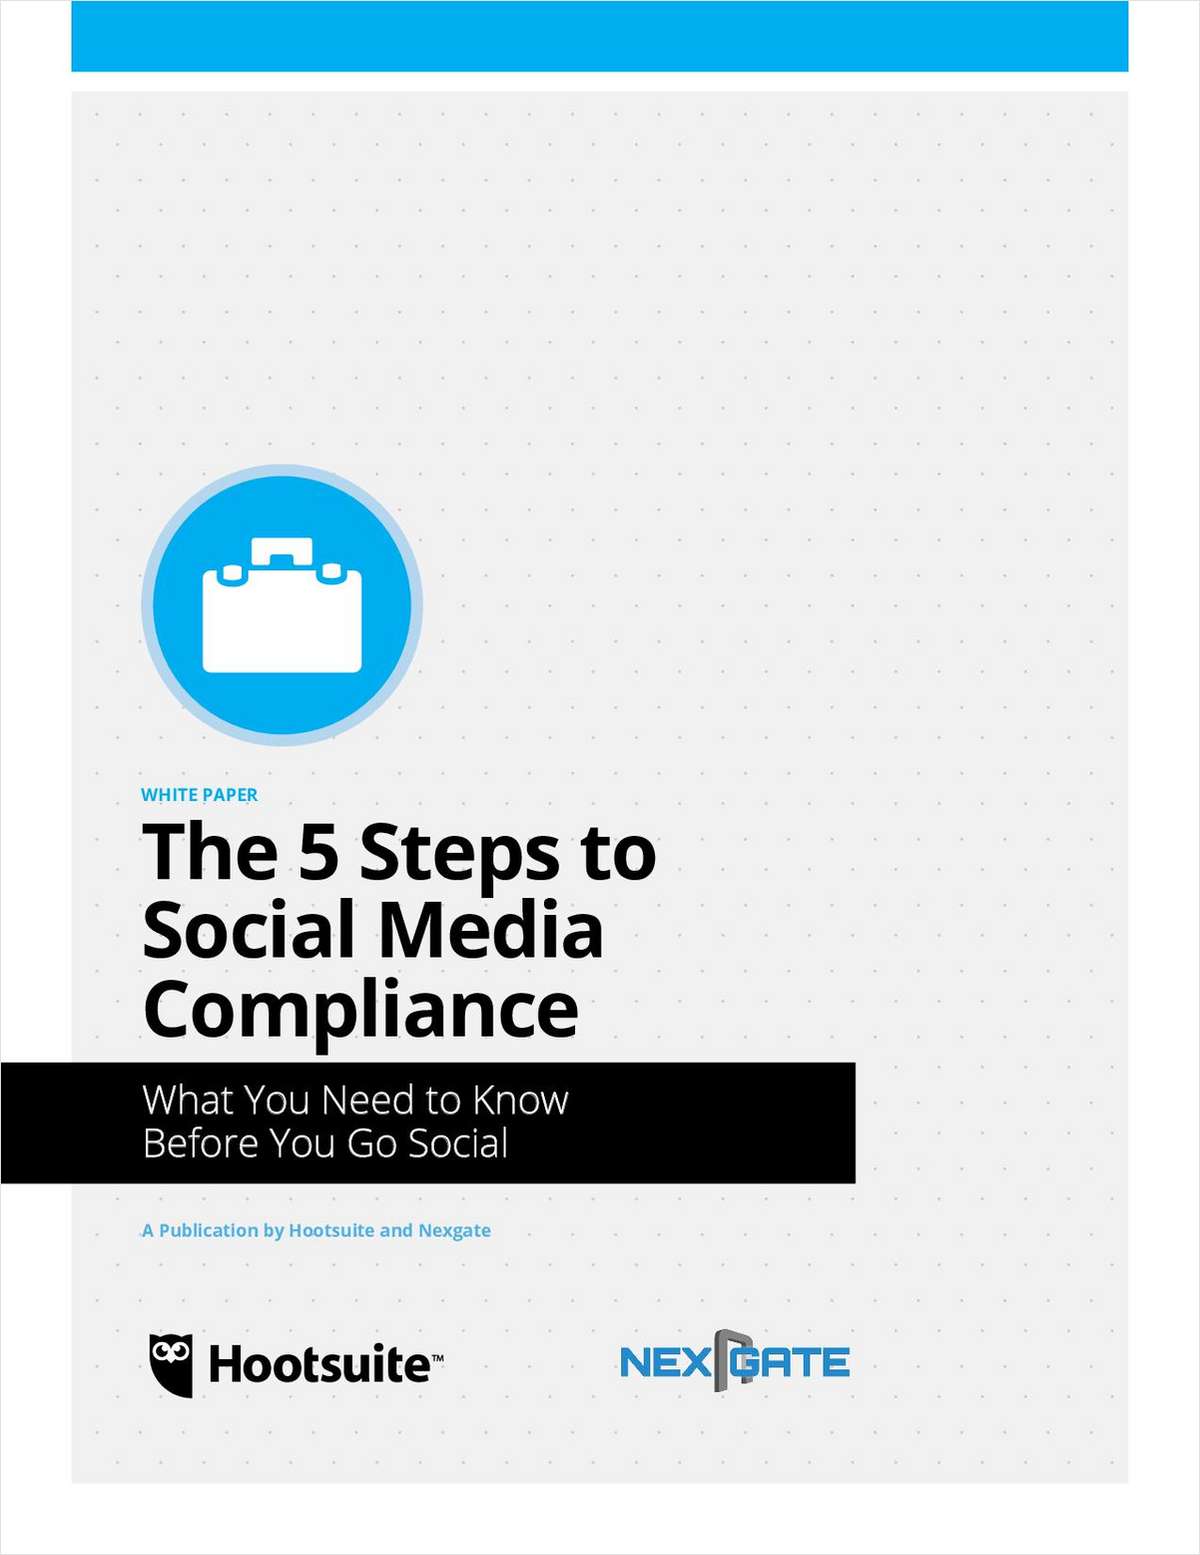 The 5 Steps to Social Media Compliance